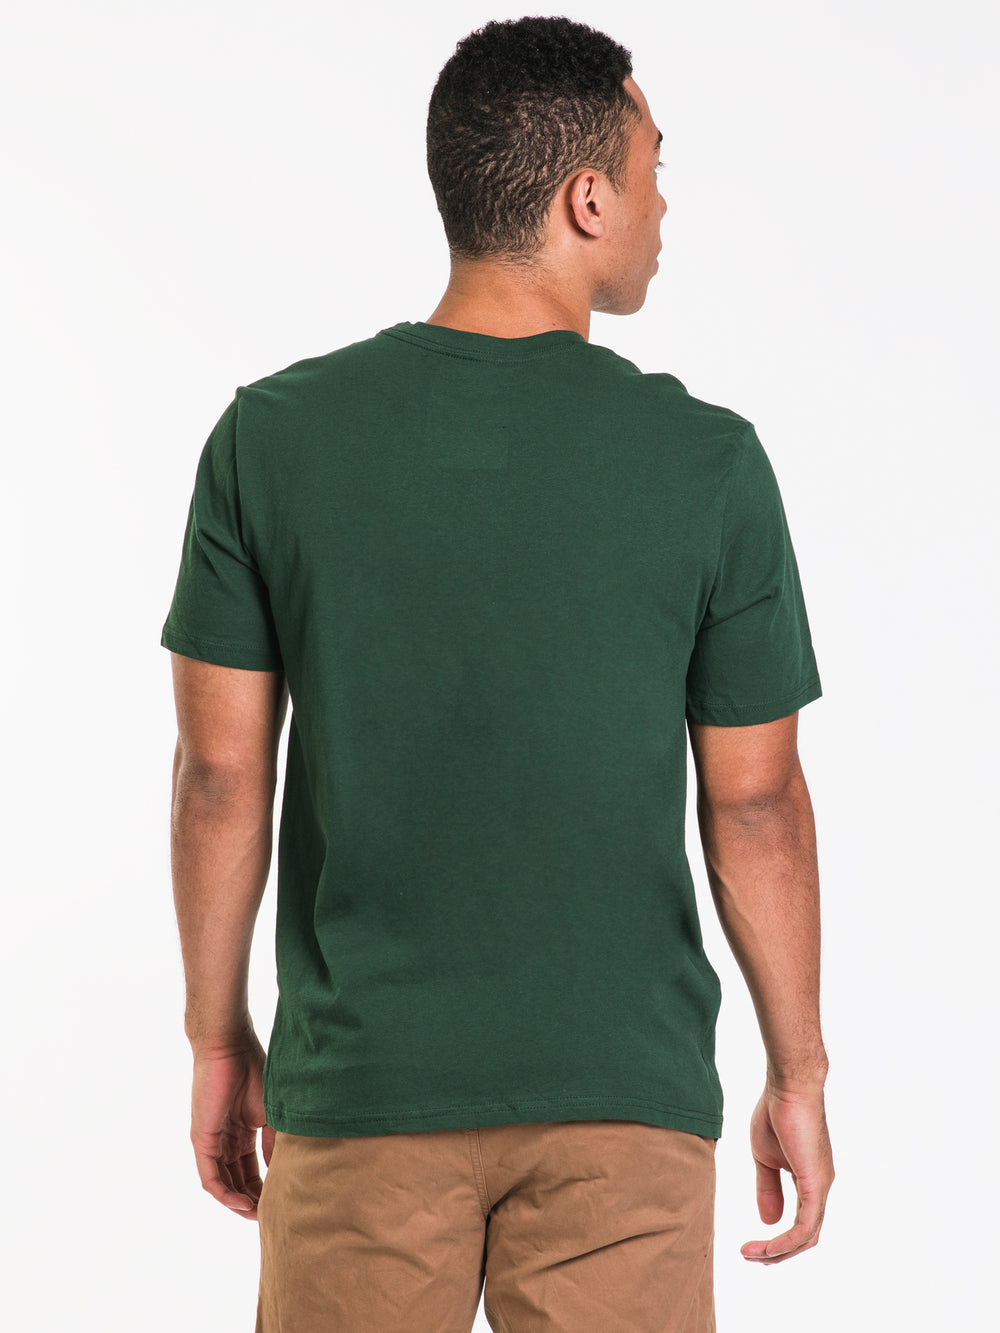 T-SHIRT ELEMENT VERTICAL OUTLINE - CLEARANCE